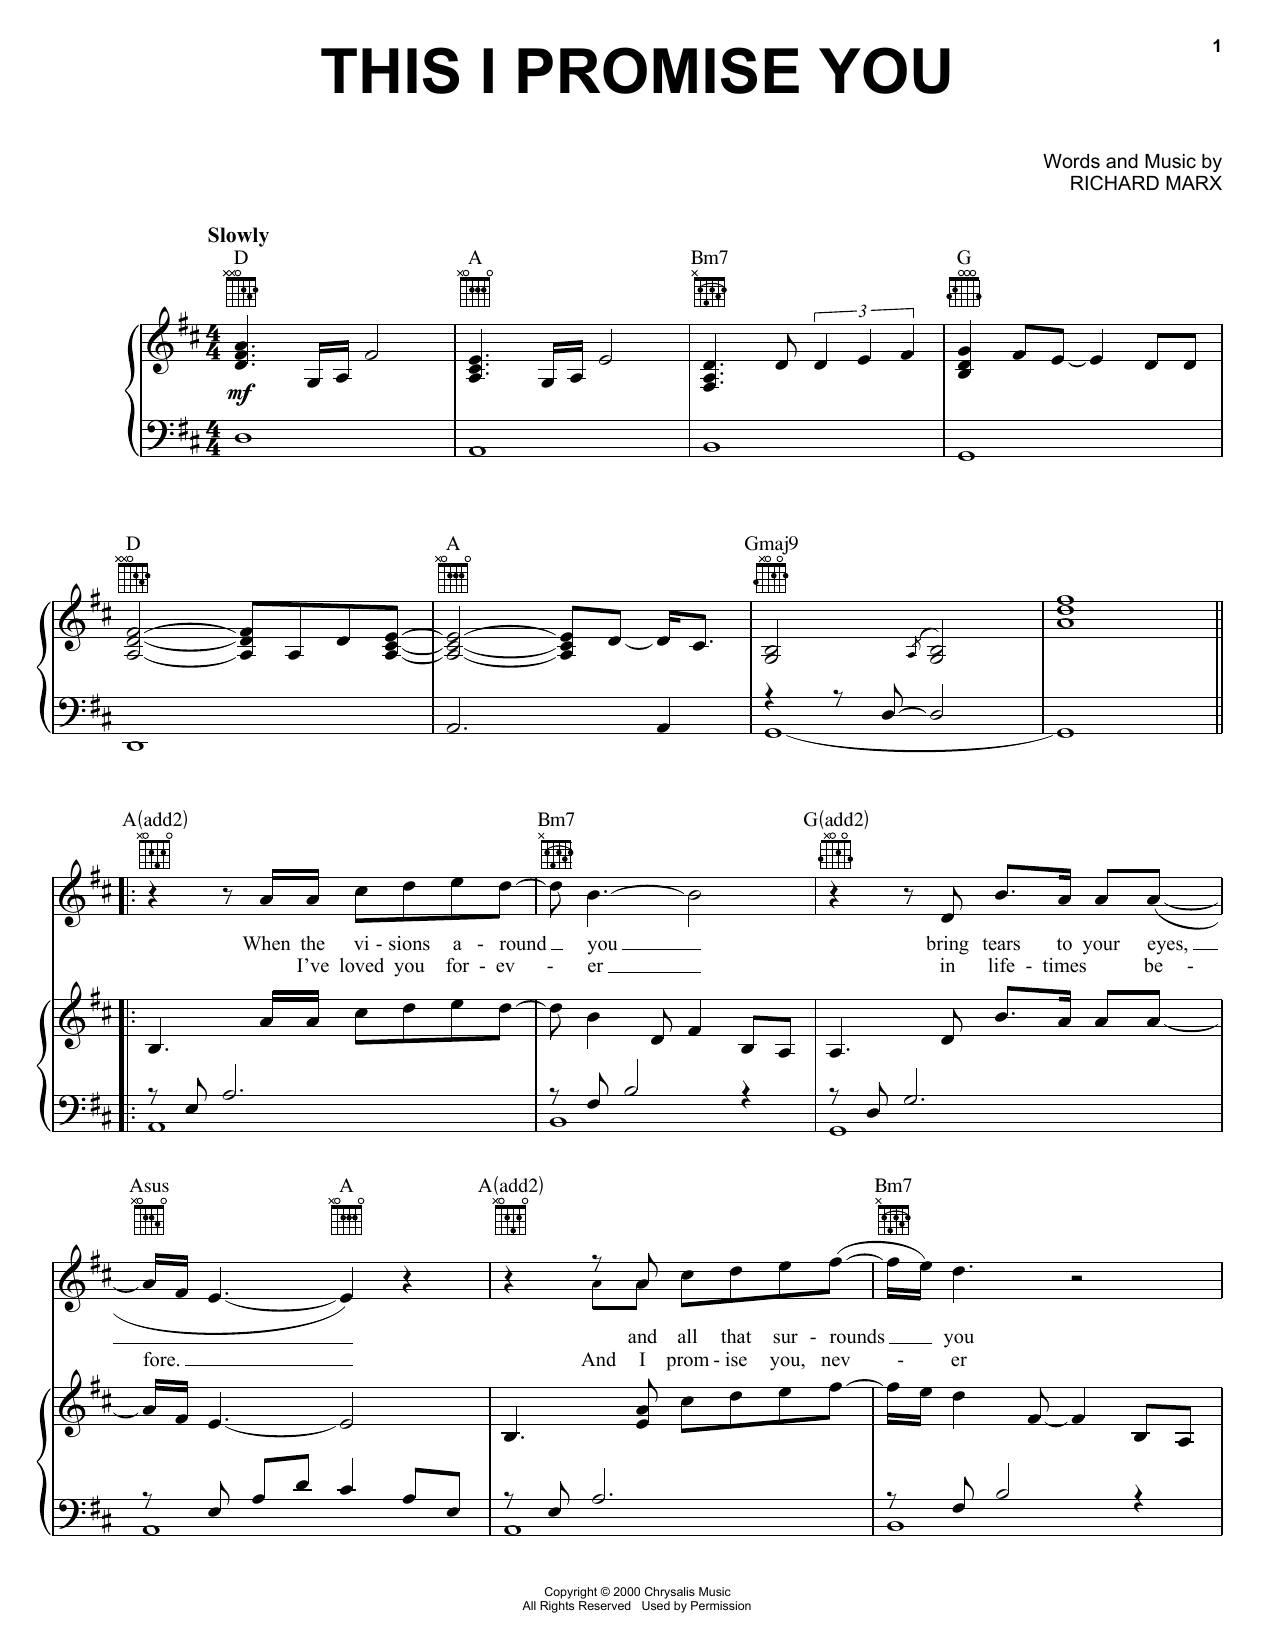 Download 'N Sync This I Promise You Sheet Music